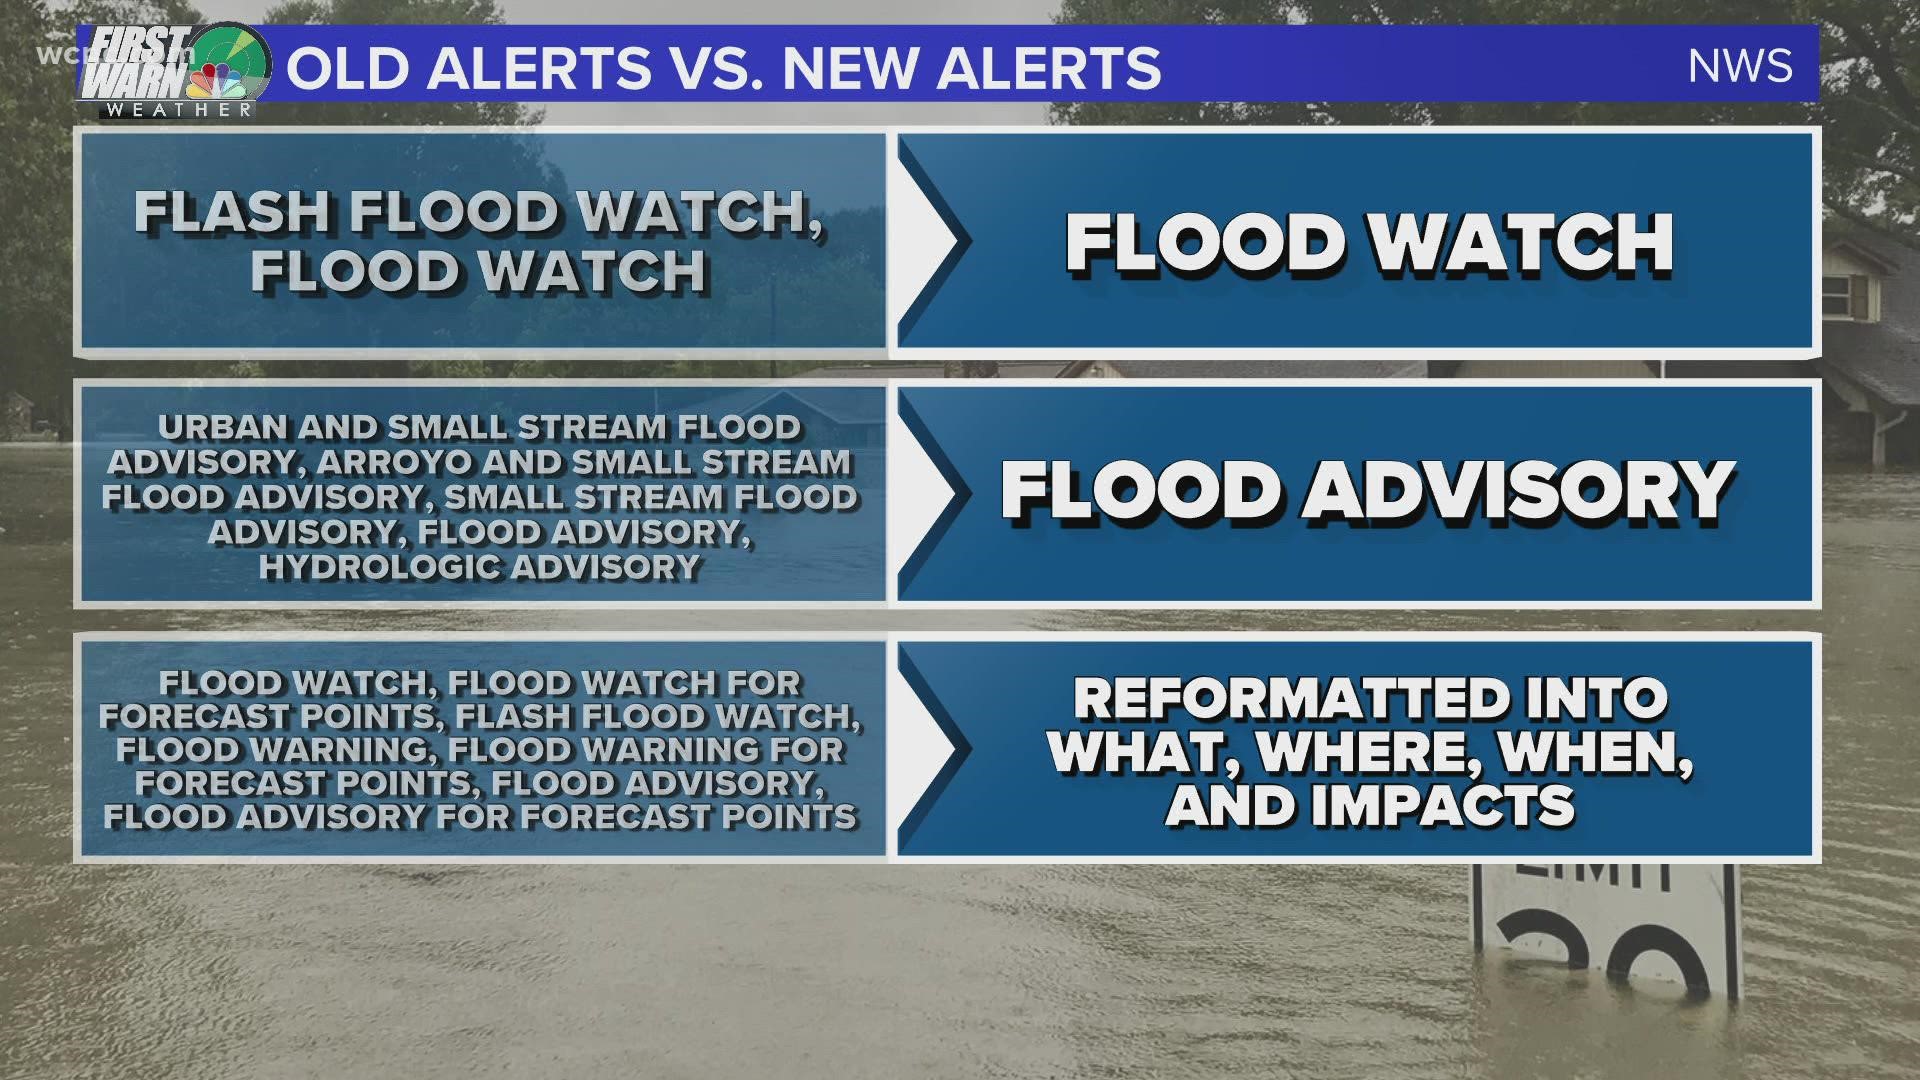 Starting Nov. 4, the National Weather Service will be simplifying water-related watches, warnings, and advisories.